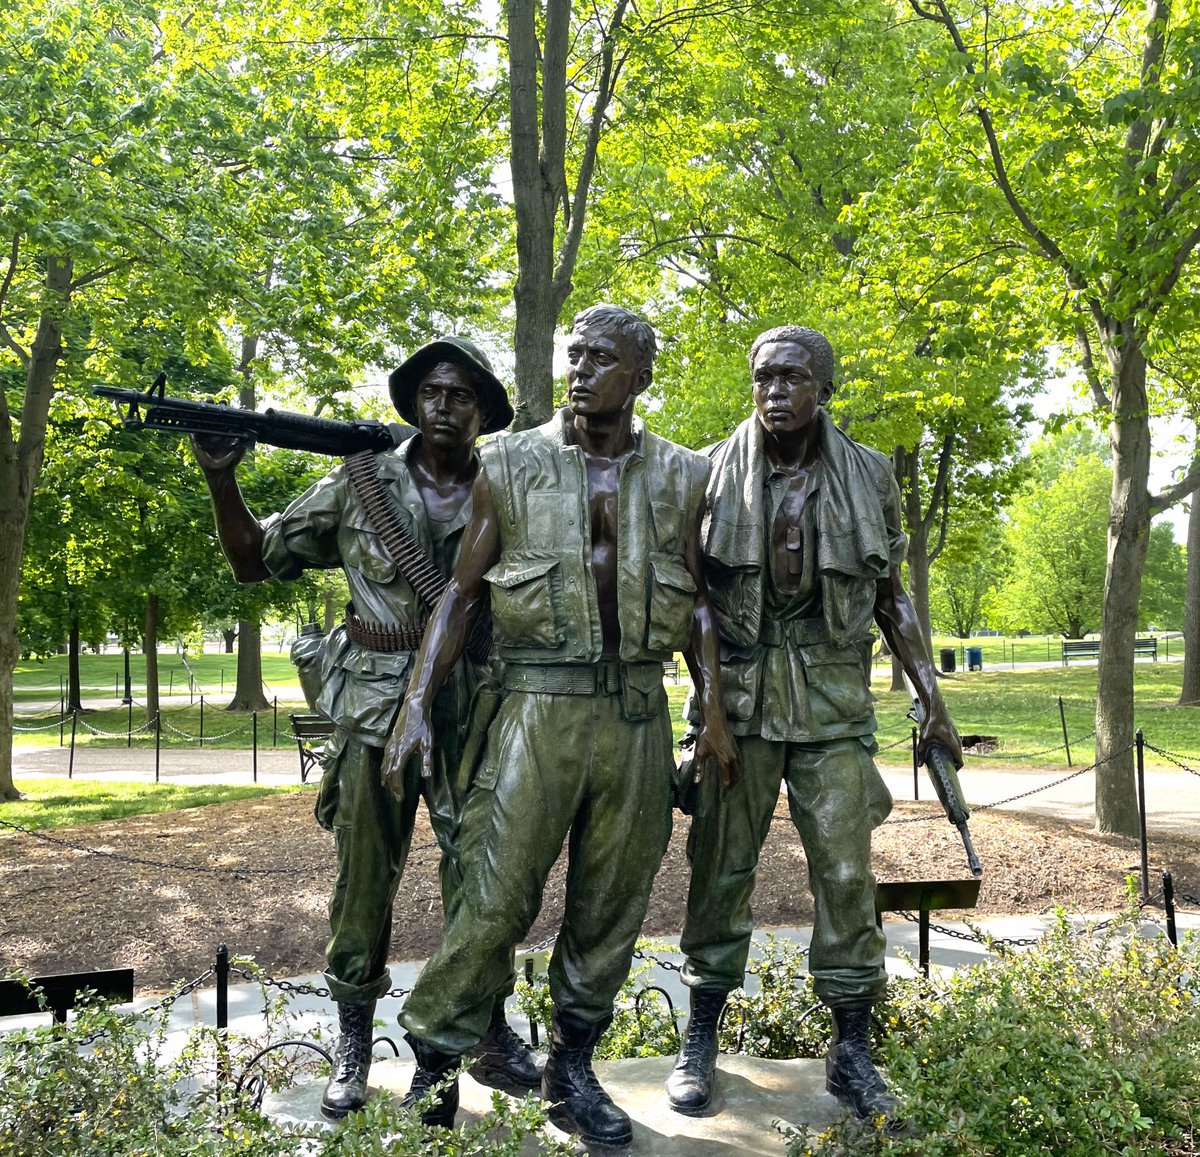 Leading up to Memorial Day, join our expert rangers to learn how creativity, symbolism, and language in memorials are used to commemorate the events and people that served and sacrificed at critical moments in our history. Dates & details here: nps.gov/nama/planyourv…